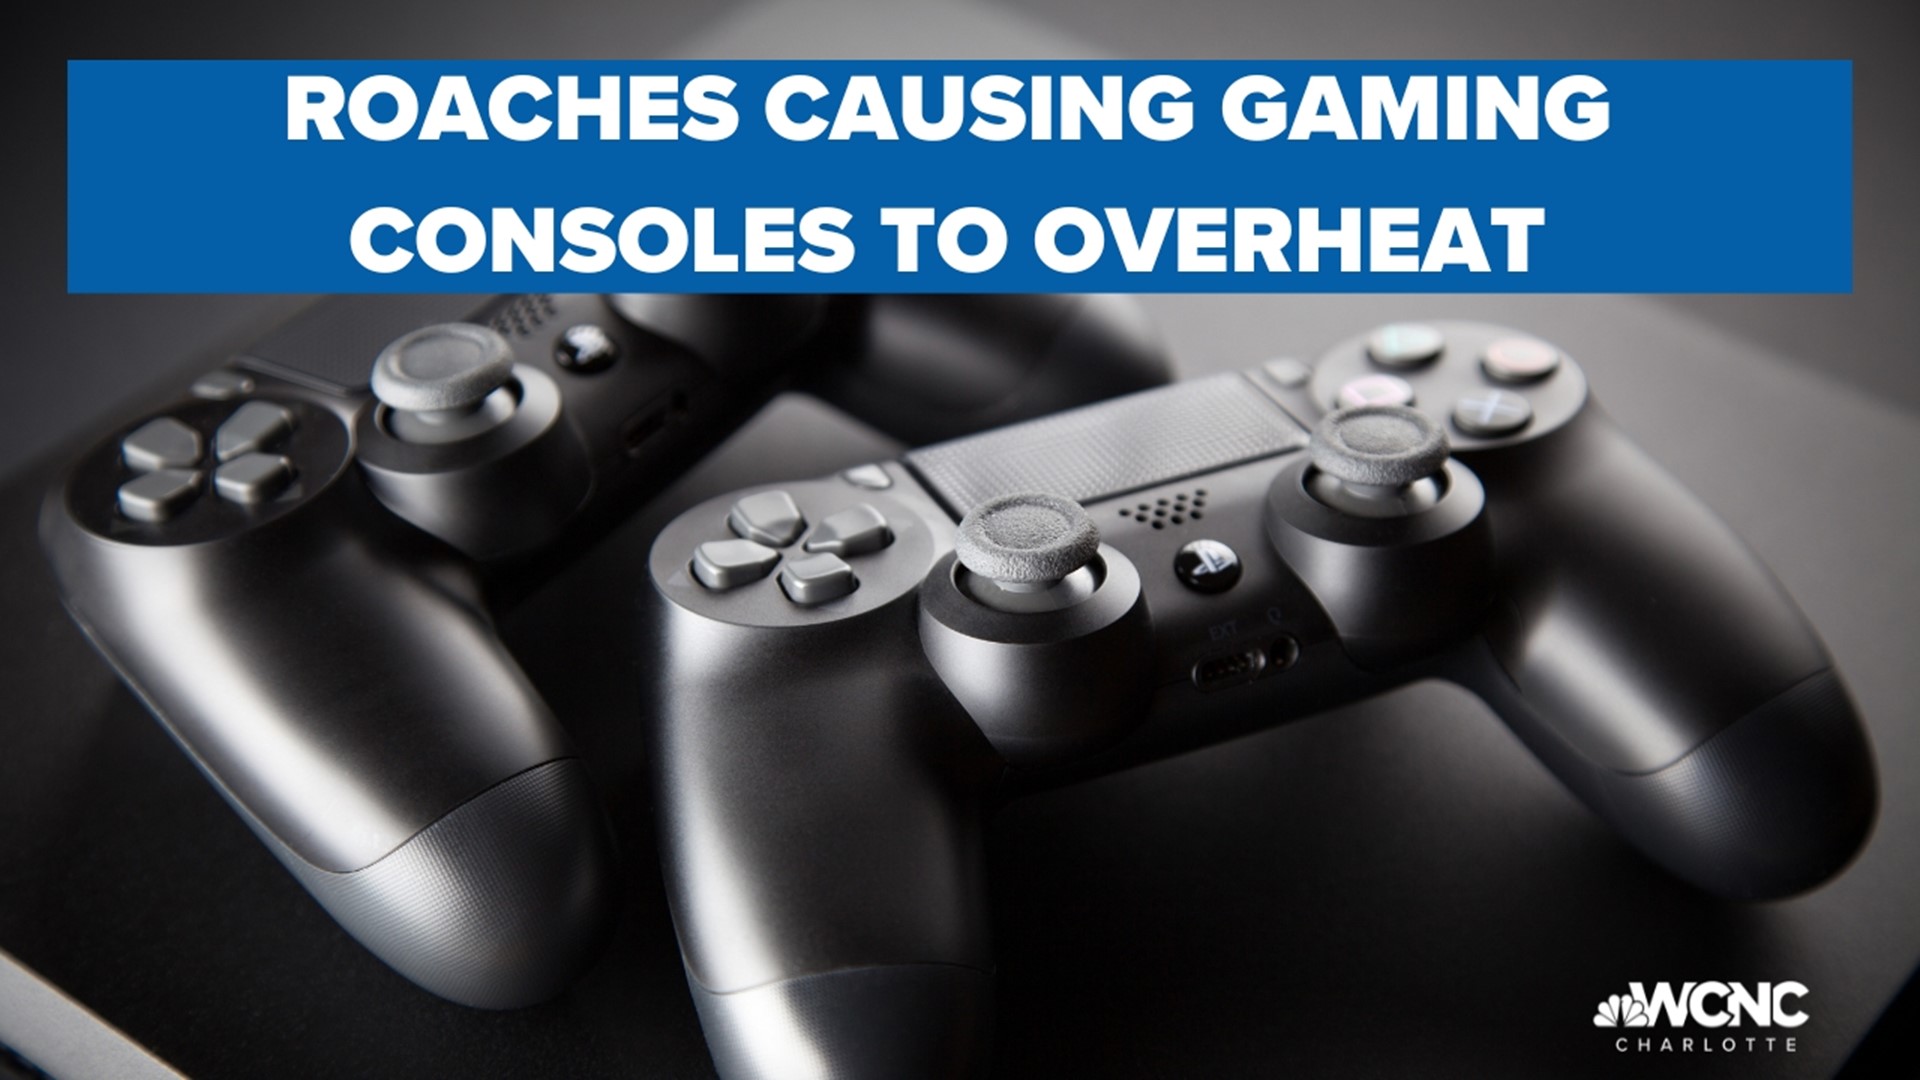 Cockroaches causing game consoles to overheat